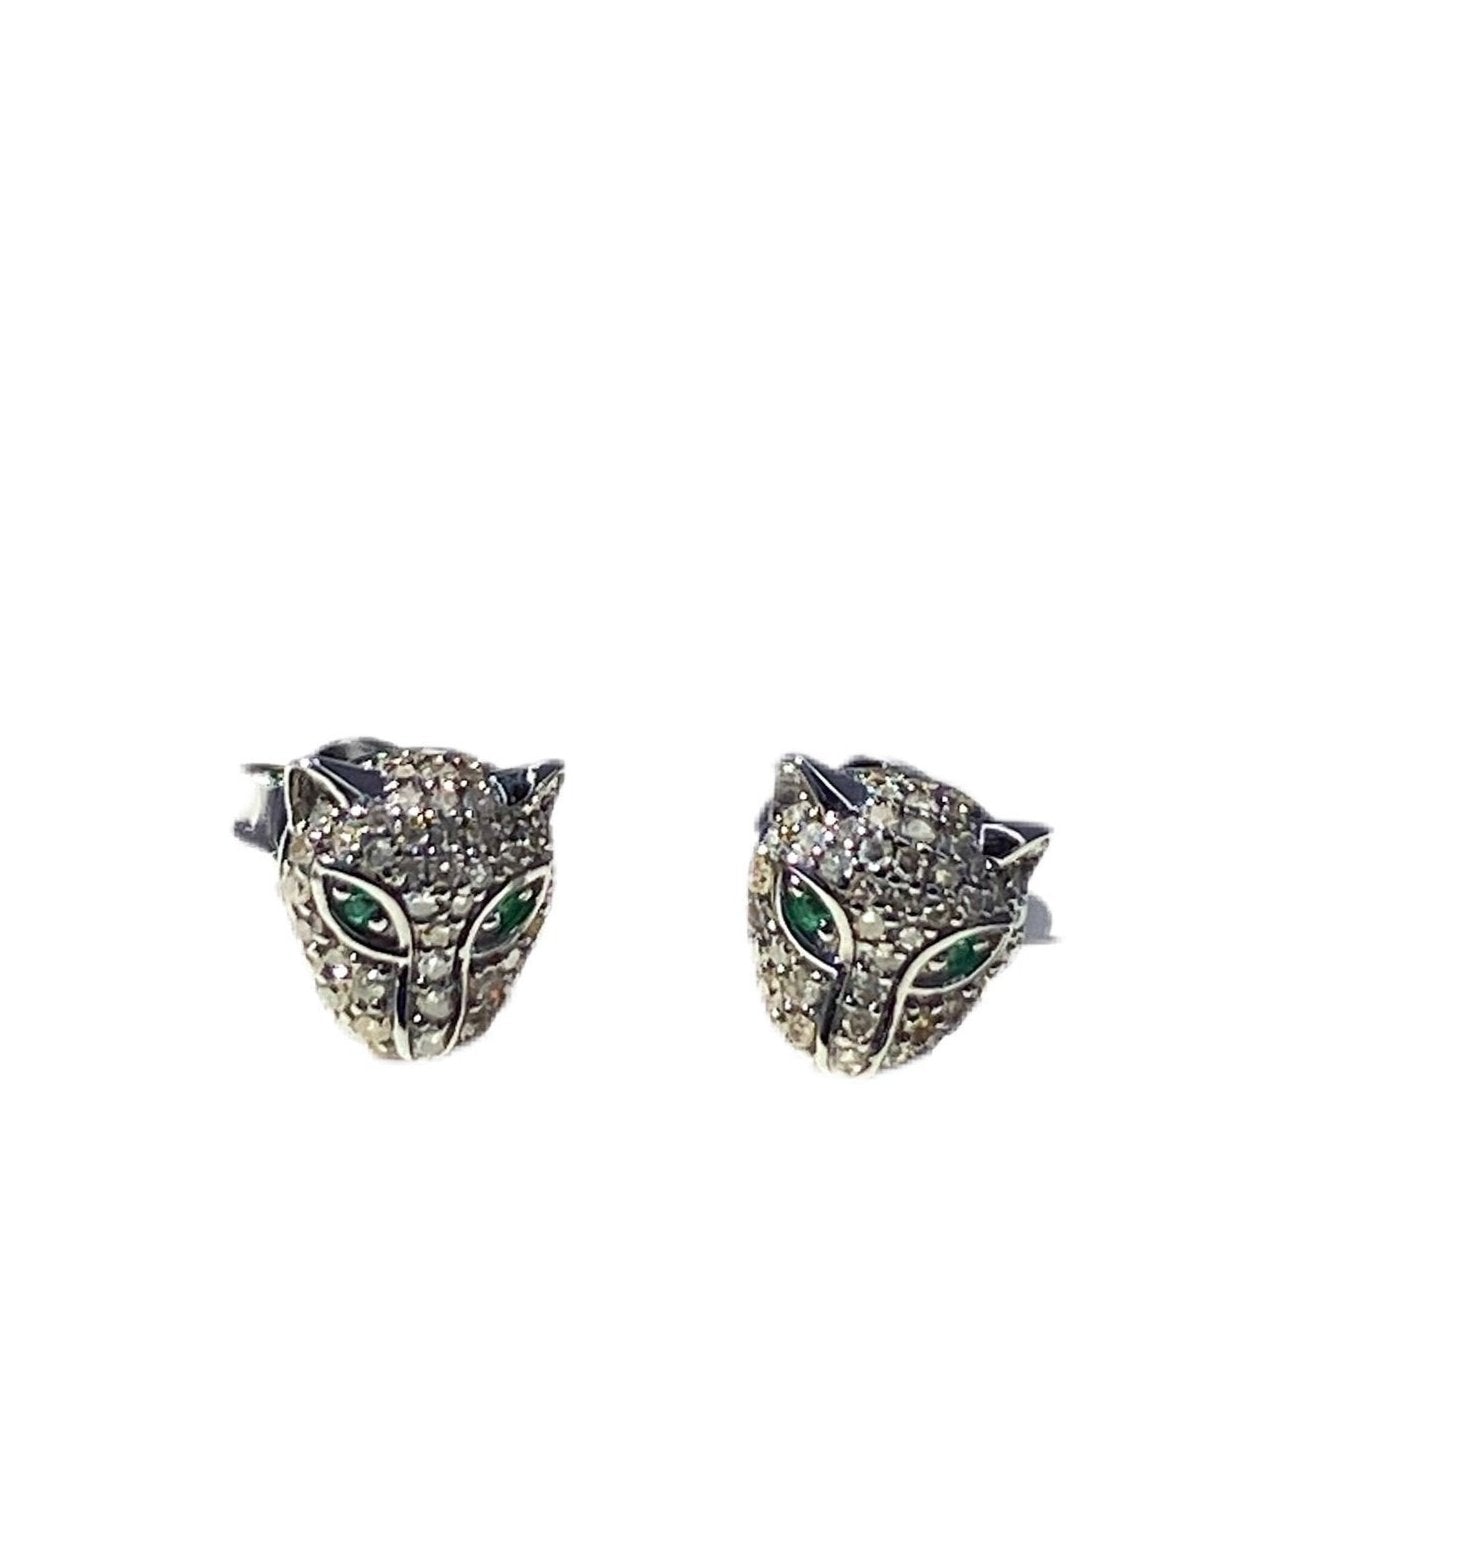 S.Row Designs Sterling Silver and Diamond Panther Earrings